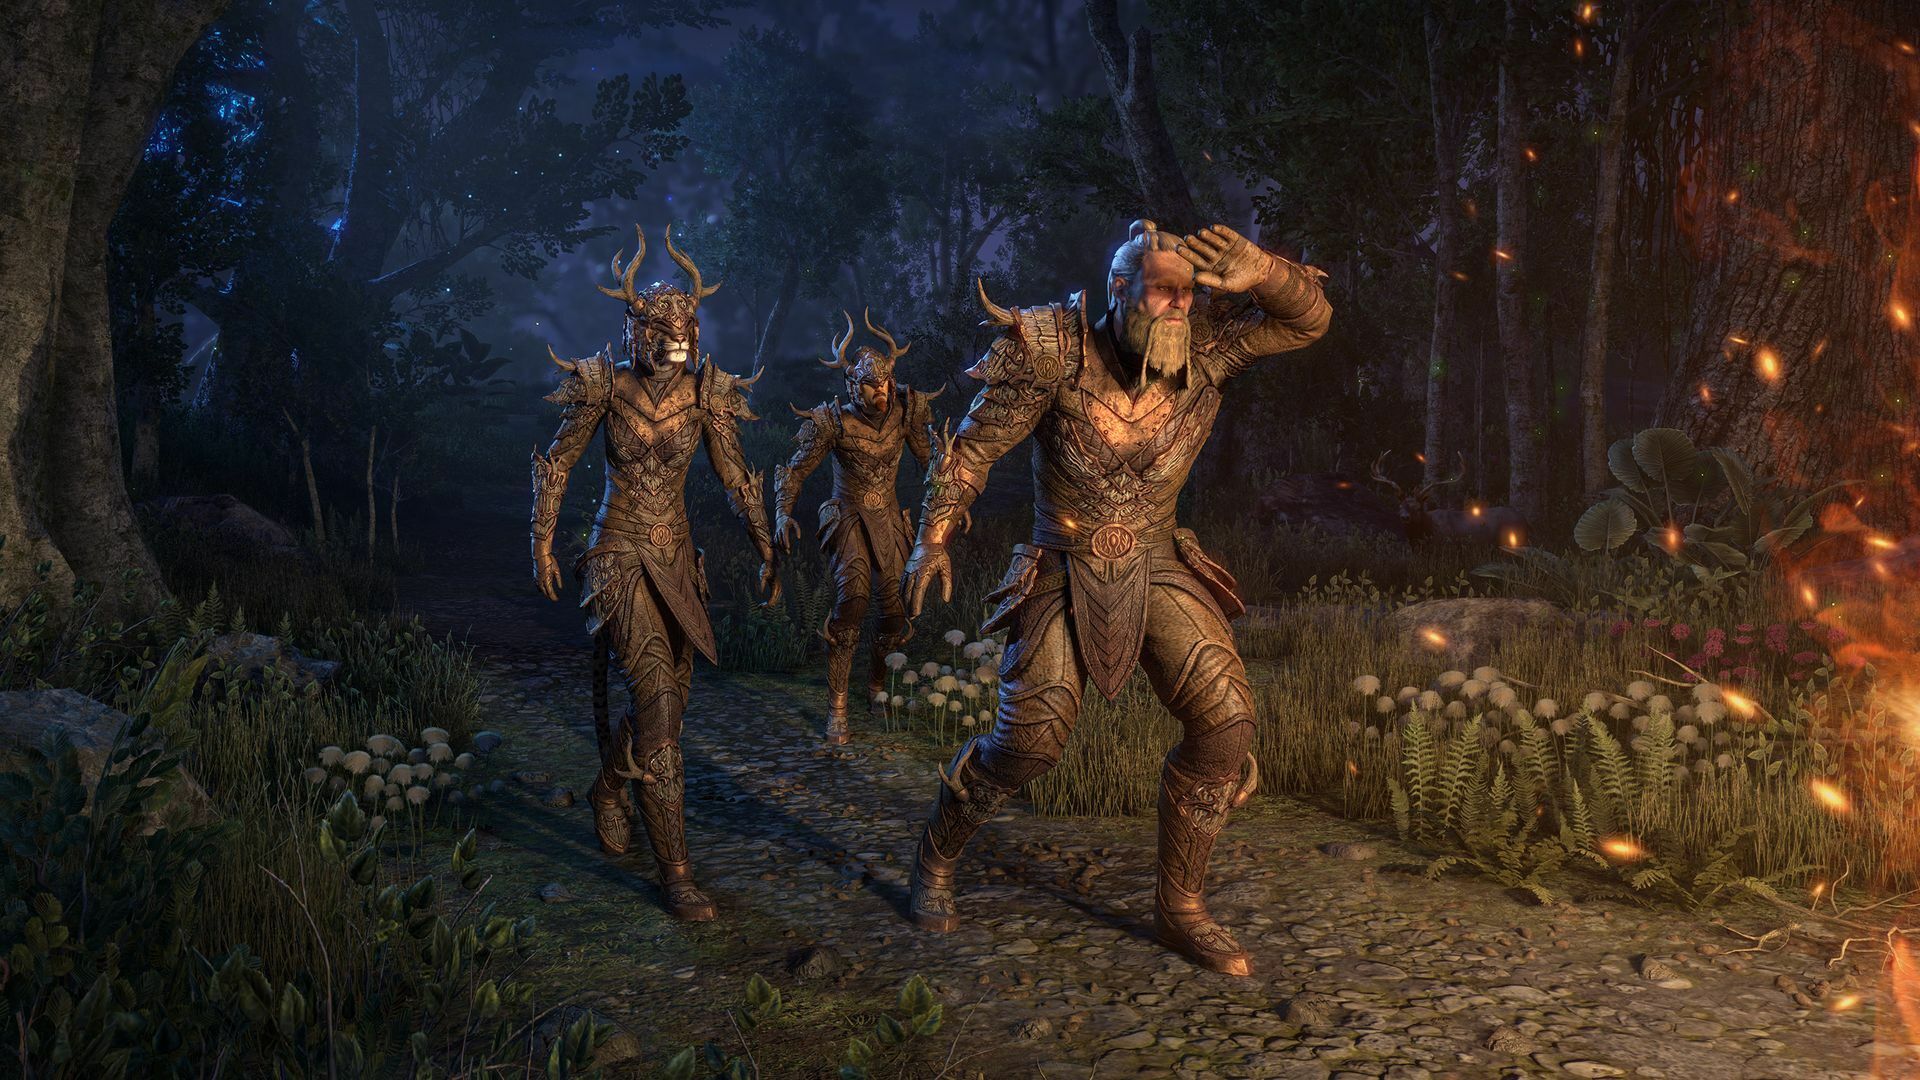 Will the ESO Combat Changes Improve Endgame Accessibility? - The Findings  of PTS Testers So Far - ESO Hub - Elder Scrolls Online